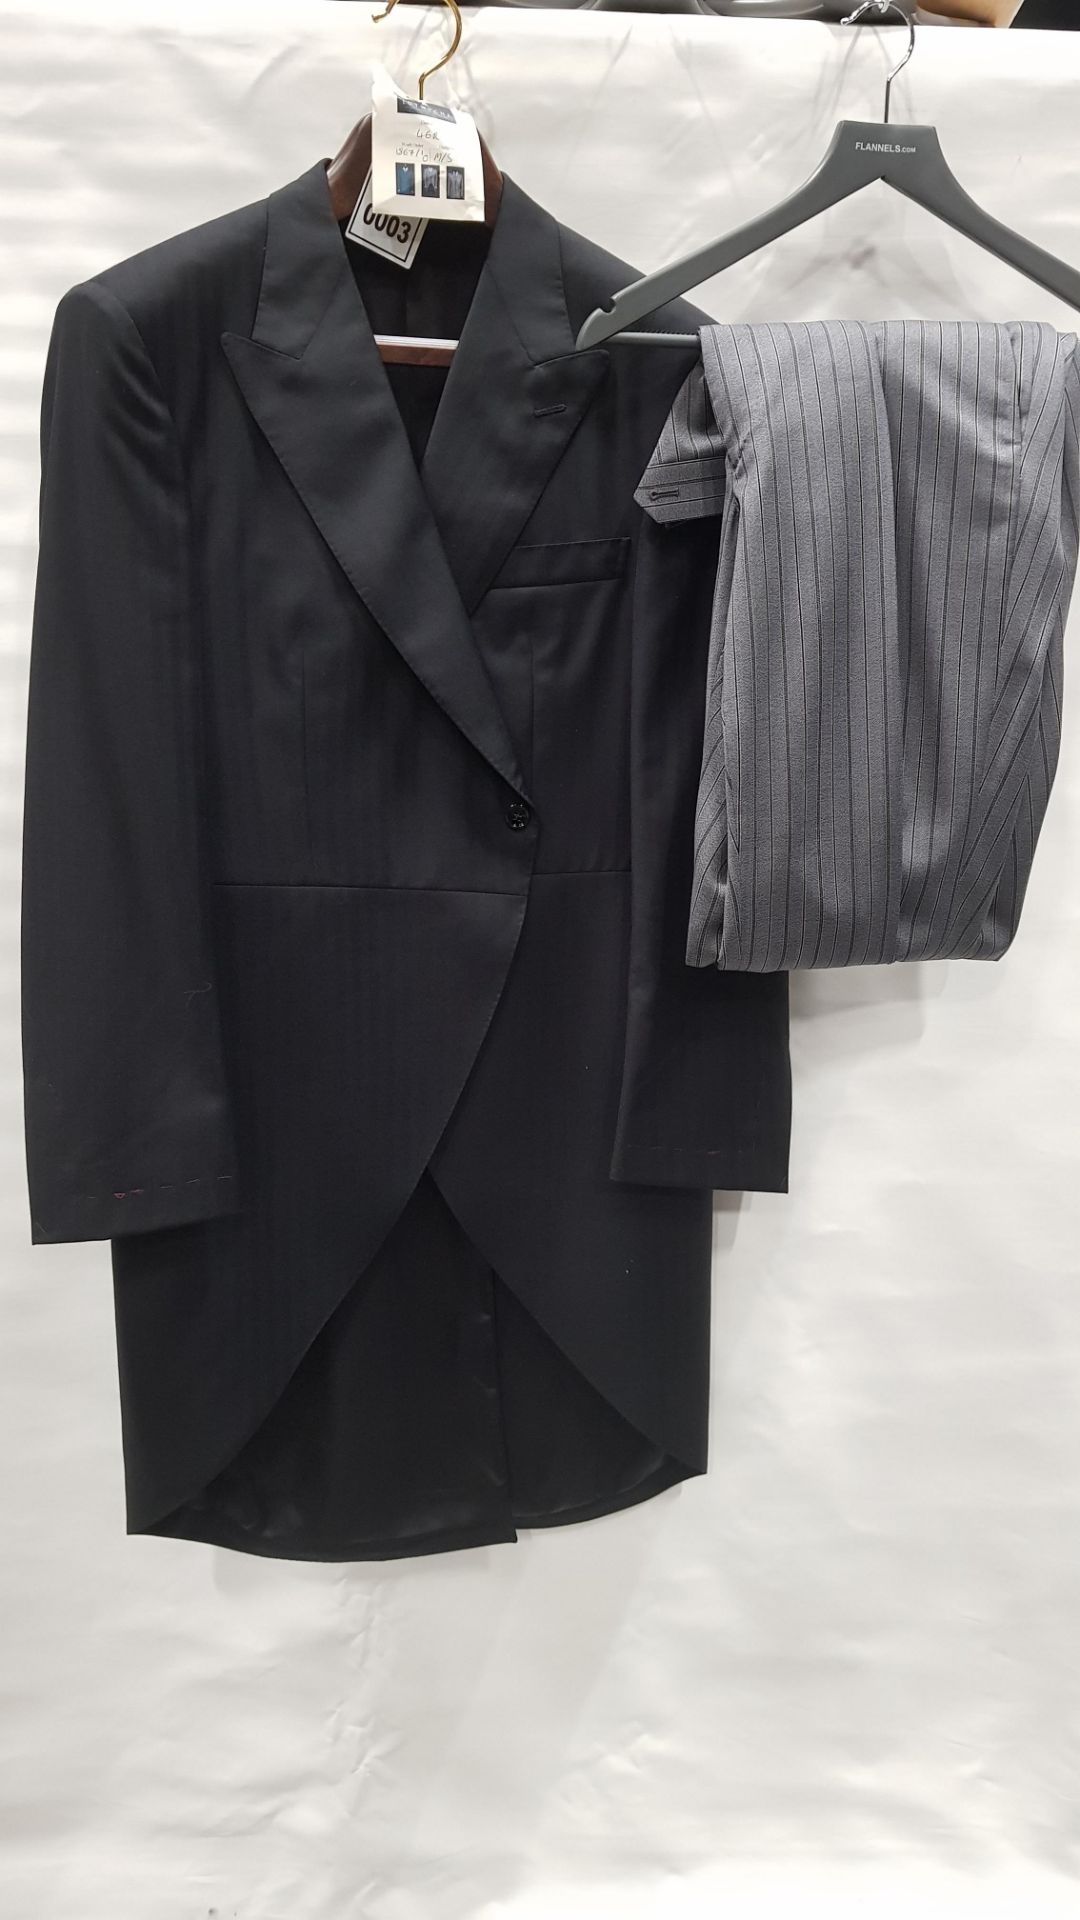 BRAND NEW LUTWYCHE BLACK TAILCOAT & GREY STRIPED TROUSERS (NOTE - NOT FULLY TAILORED) - SIZE 36R